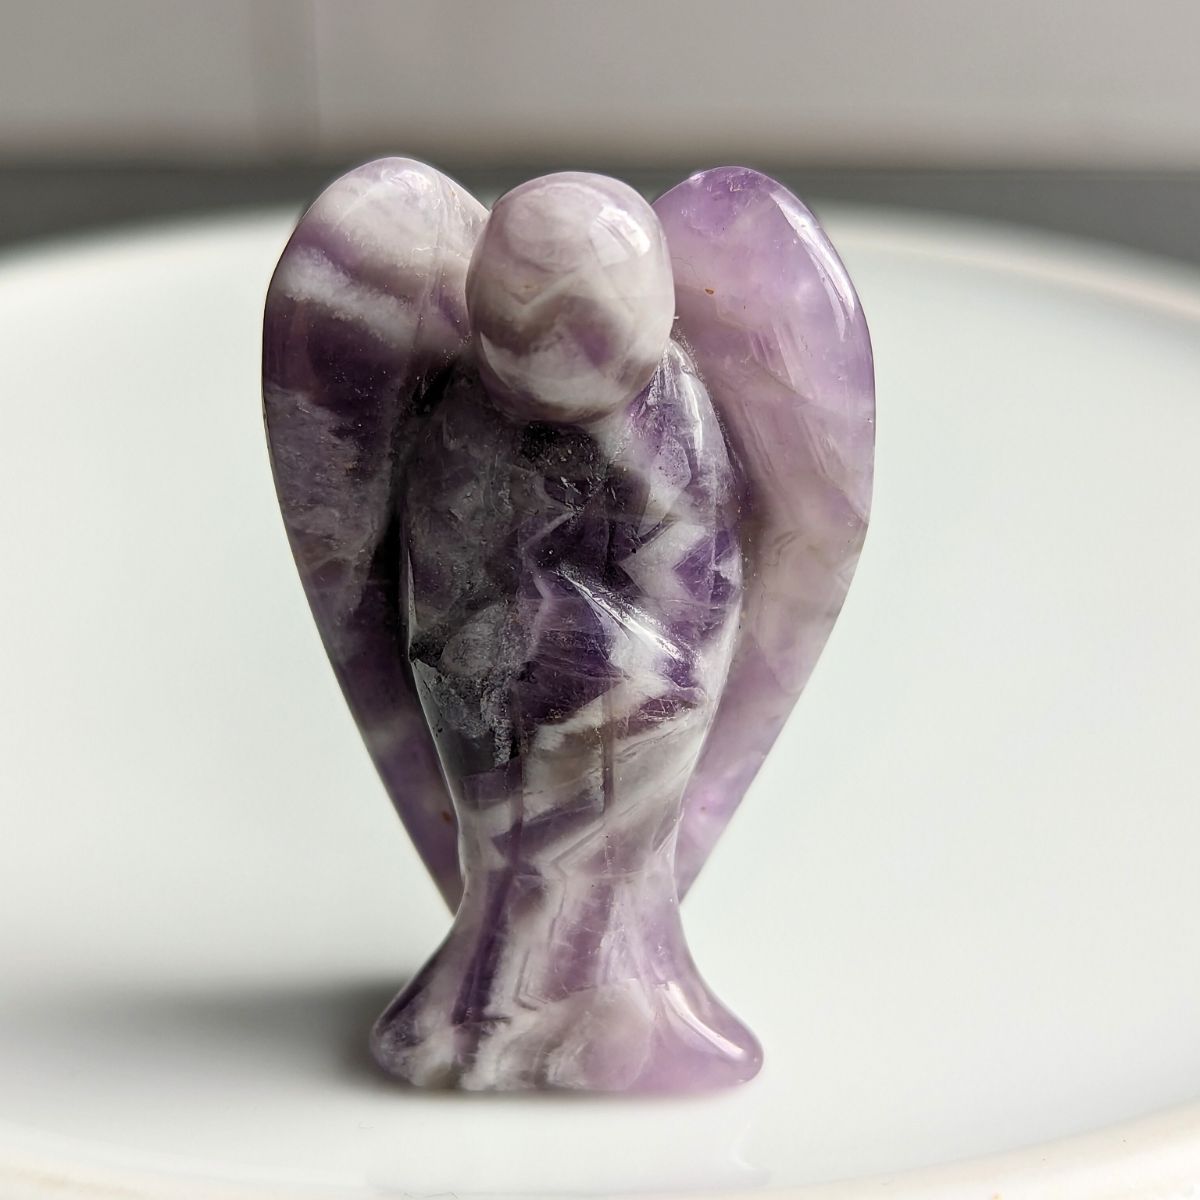 Small Amethyst Crystal Angel Figurine Carved from Natural Stone - Exquisite Crystals